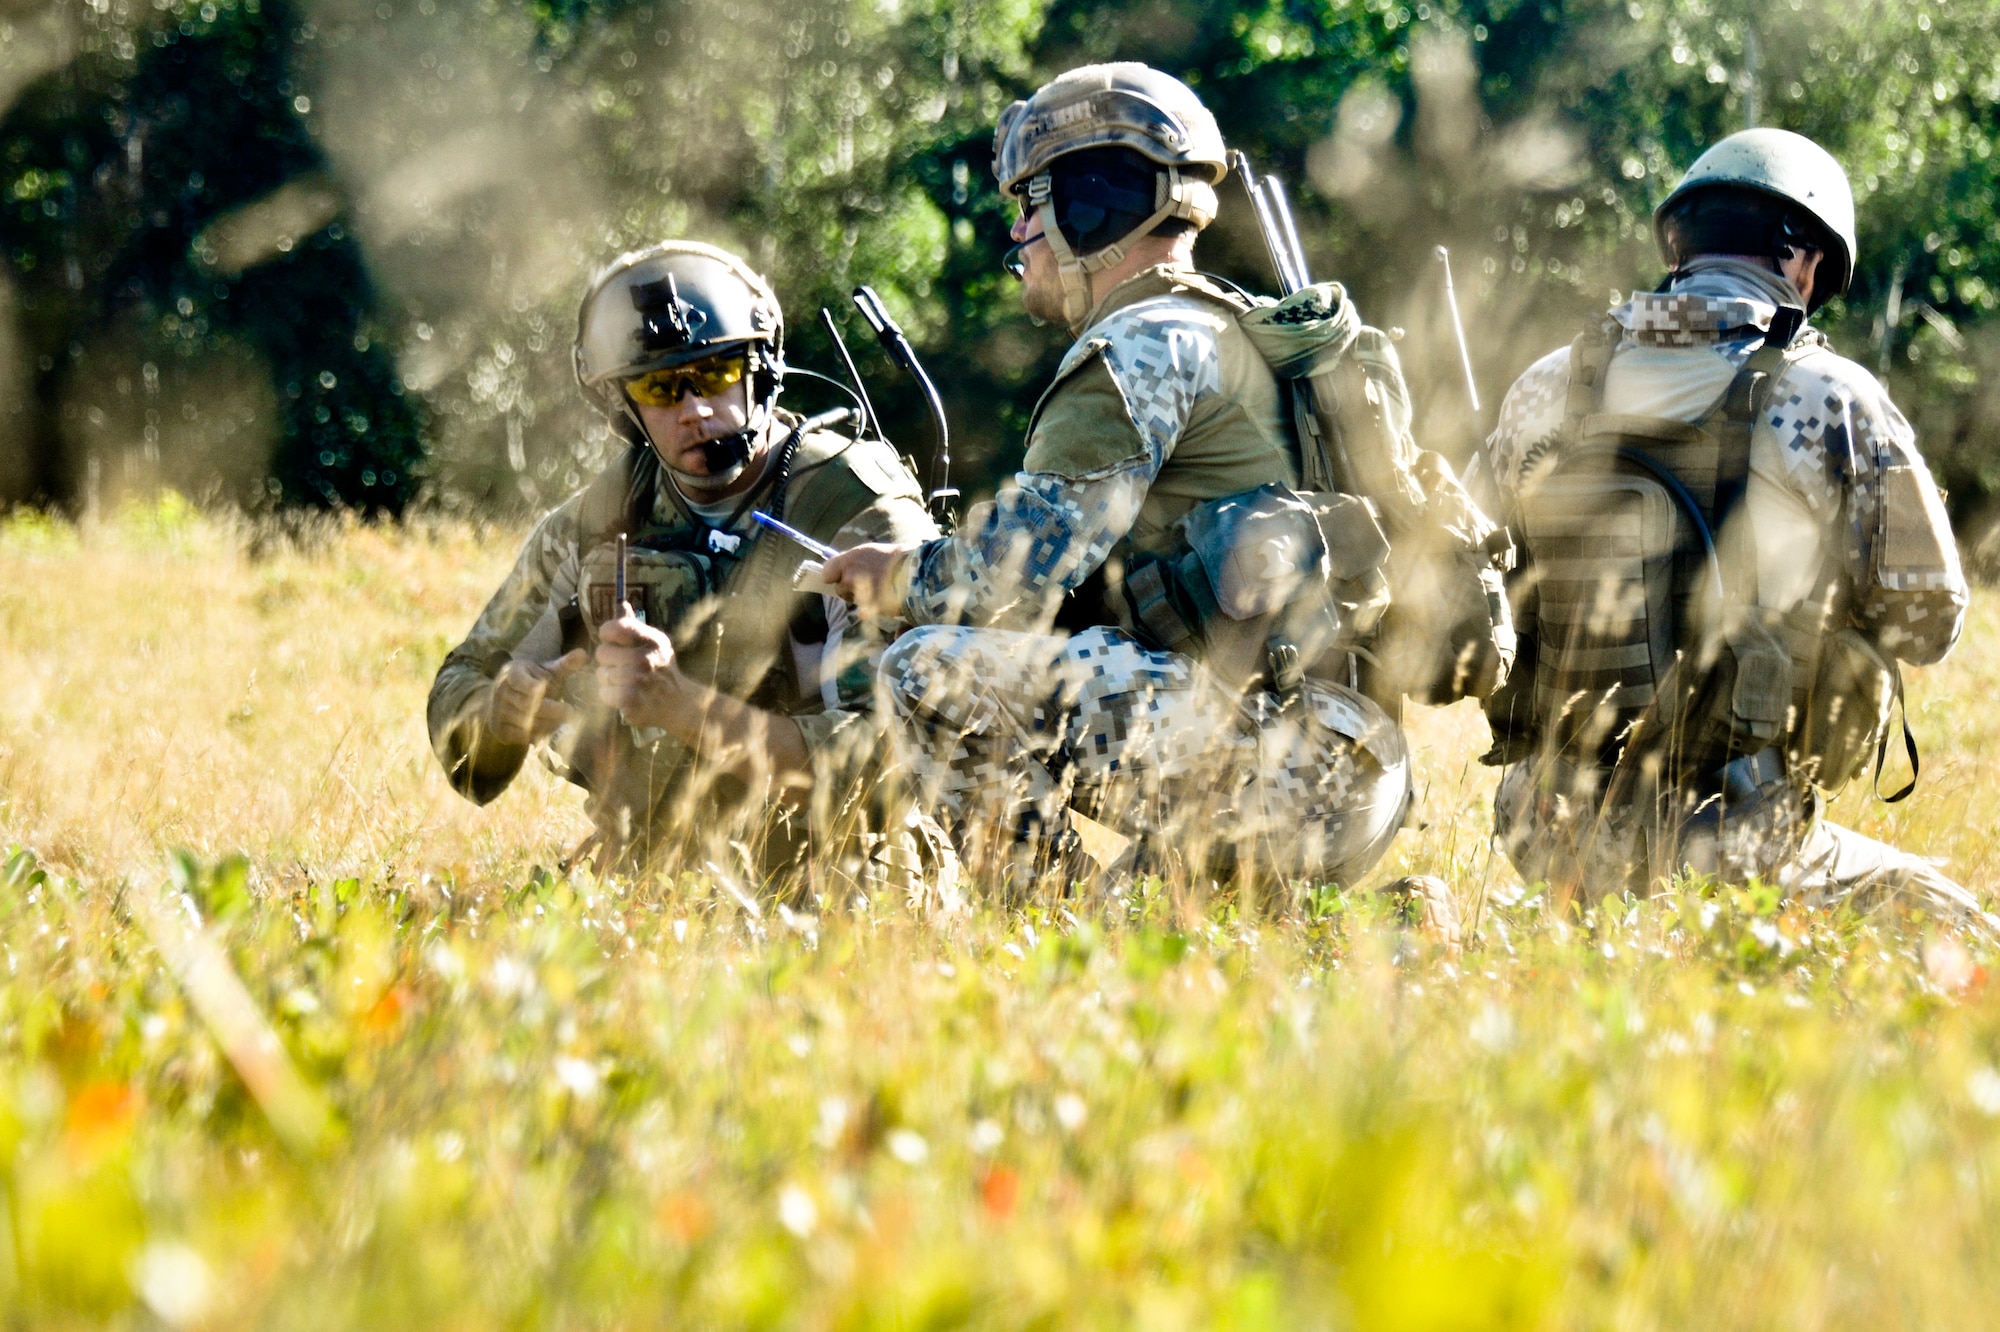 From left, U.S. Air Force Master Sgt. John M. Oliver, Tactical Air Control Party specialist with the 169th Air Support Operations Squadron, Latvian 1st Sgt. Modris Circenis and Cpl. Janis Gabranis, TACPs with the Latvian National Armed Forces, make a plan to advance on an enemy position during a reconnaissance mission at Operation Northern Strike in Grayling Air Gunnery Range, Grayling, Mich., Aug. 14, 2014. Northern Strike was a 3-week-long exercise led by the National Guard that demonstrated the combined power of joint and multinational air and ground forces. TACPs with the Air National Guard’s 169th ASOS from Peoria, Ill., and more than 5,000 other armed forces members from 12 states and two coalition nations participated in the combat training. (U.S. Air National Guard photo by Staff Sgt. Lealan Buehrer/Released)